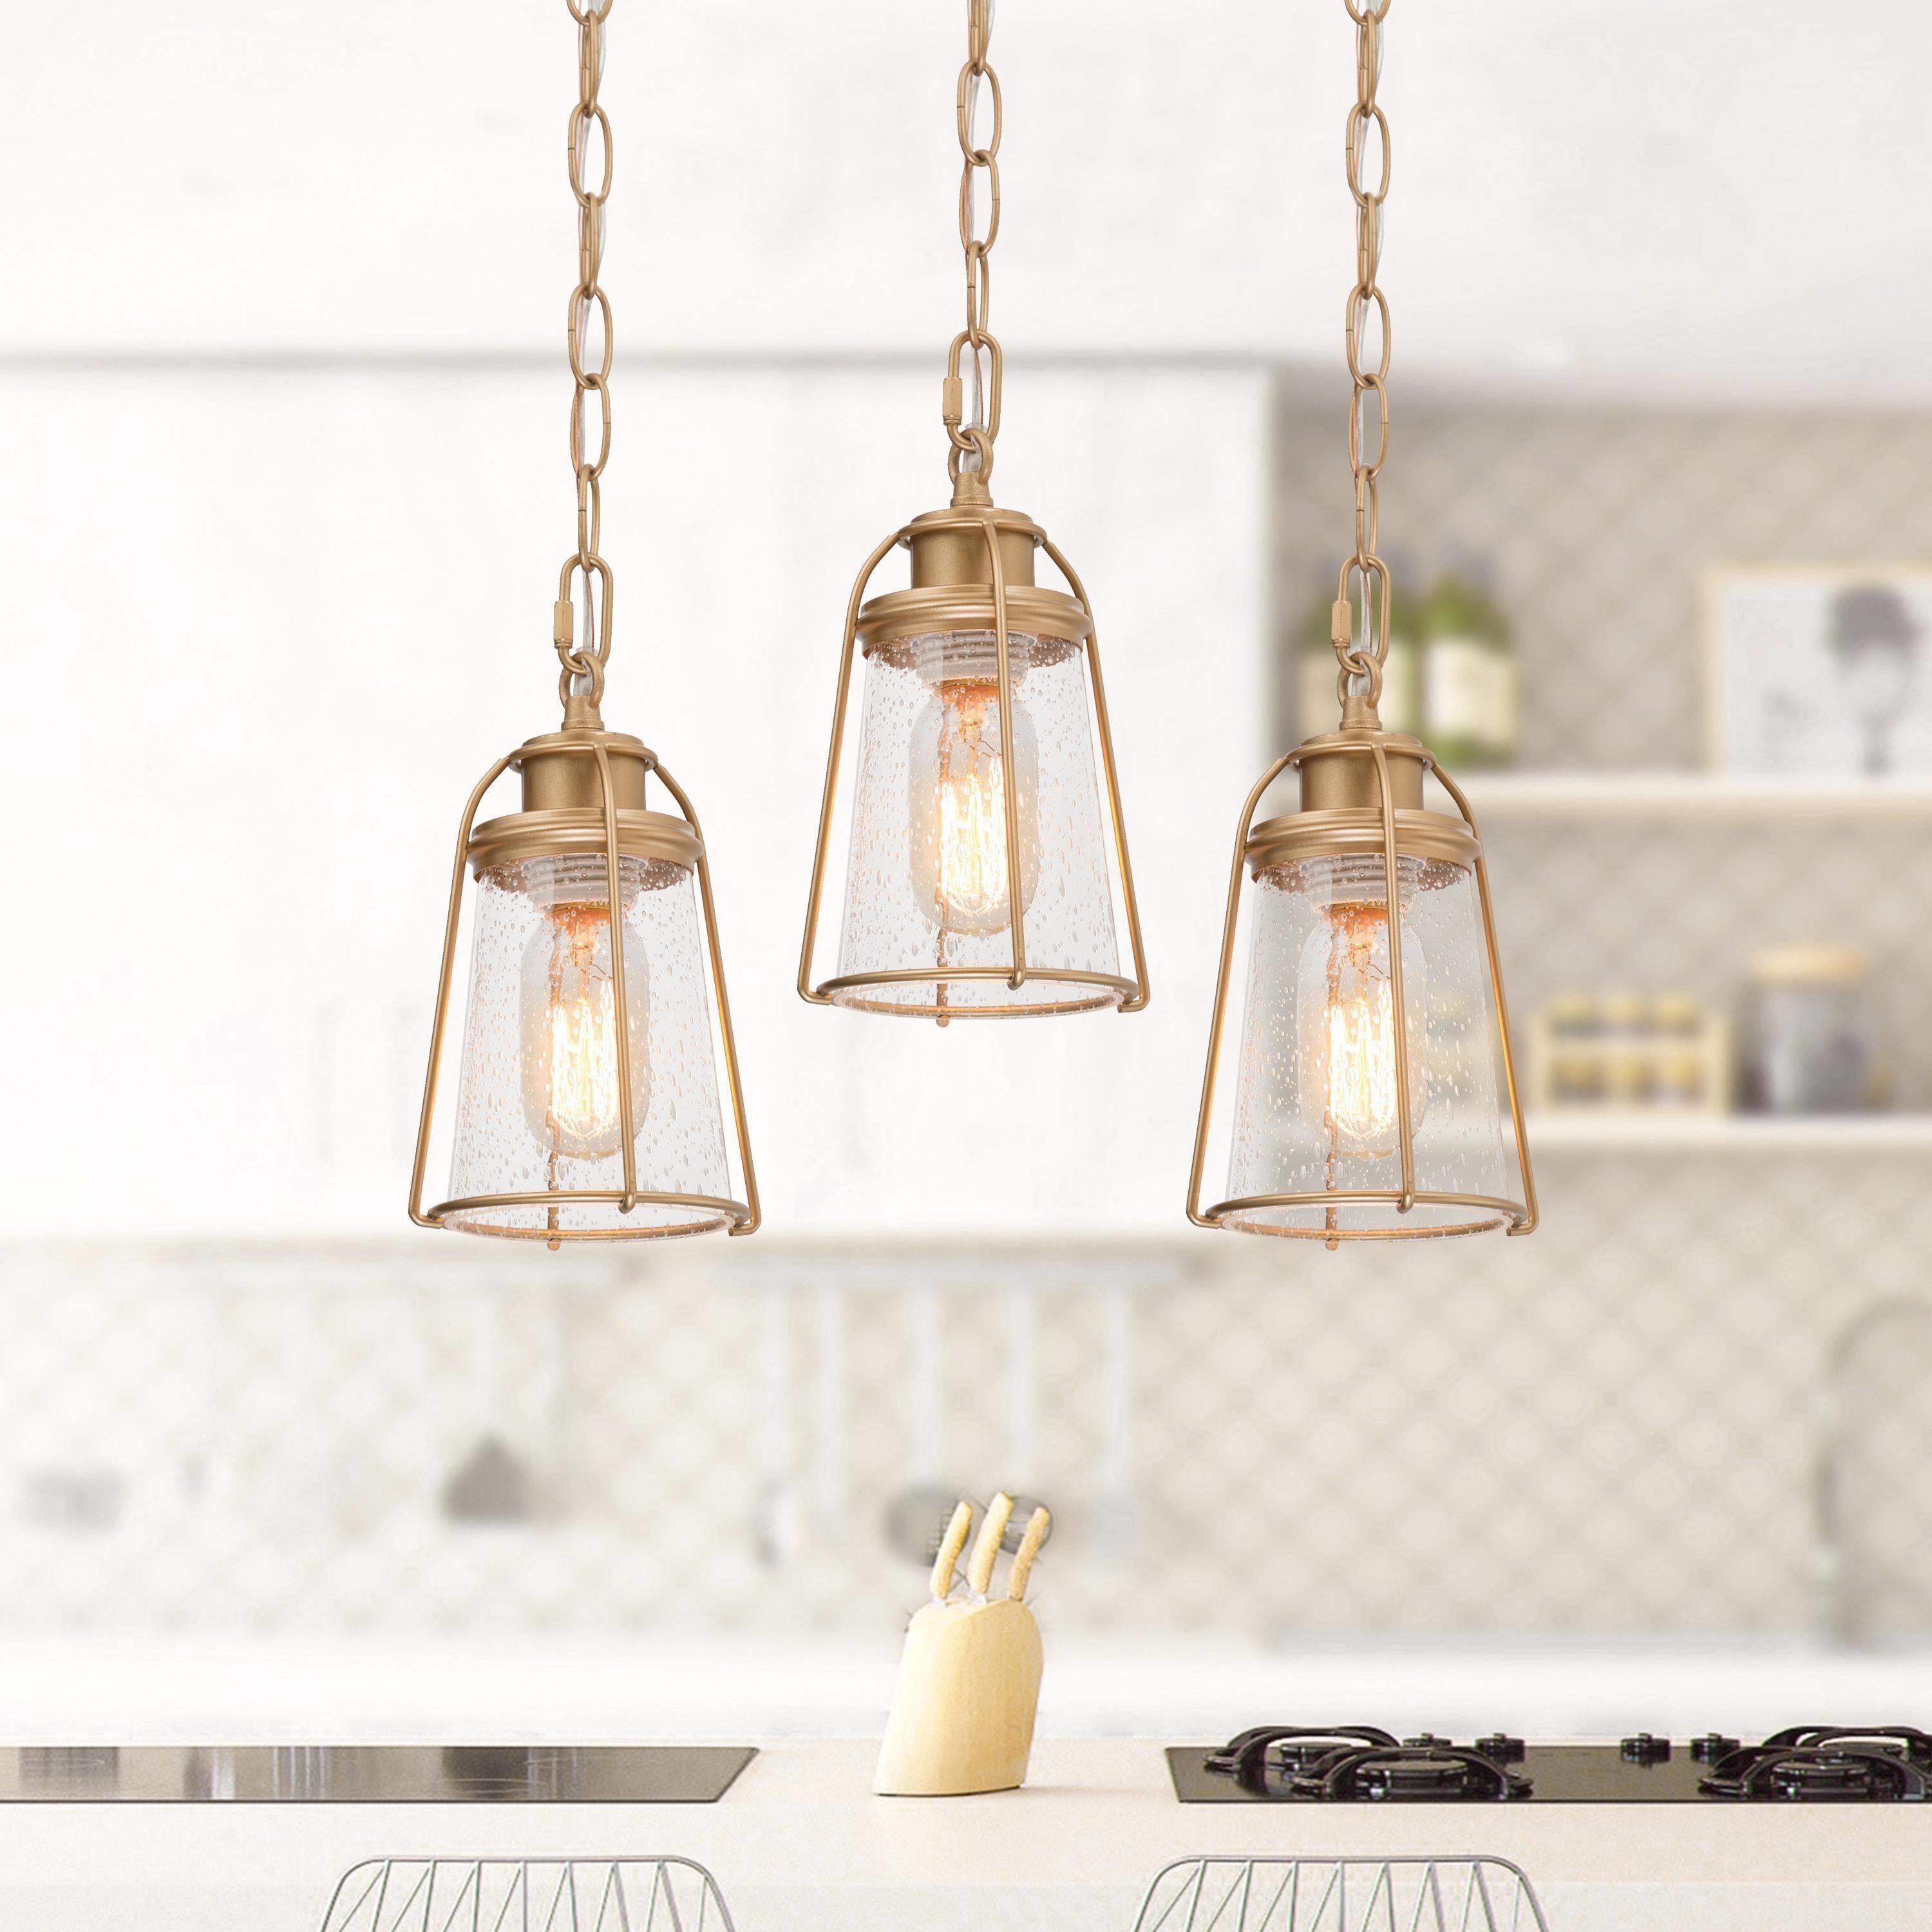 Uolfin Matte Gold Glass Pendant Glass Lighting department and Shade Modern/Contemporary in Lantern Light Island the Hanging Mini LED Kitchen Seeded at Seeded